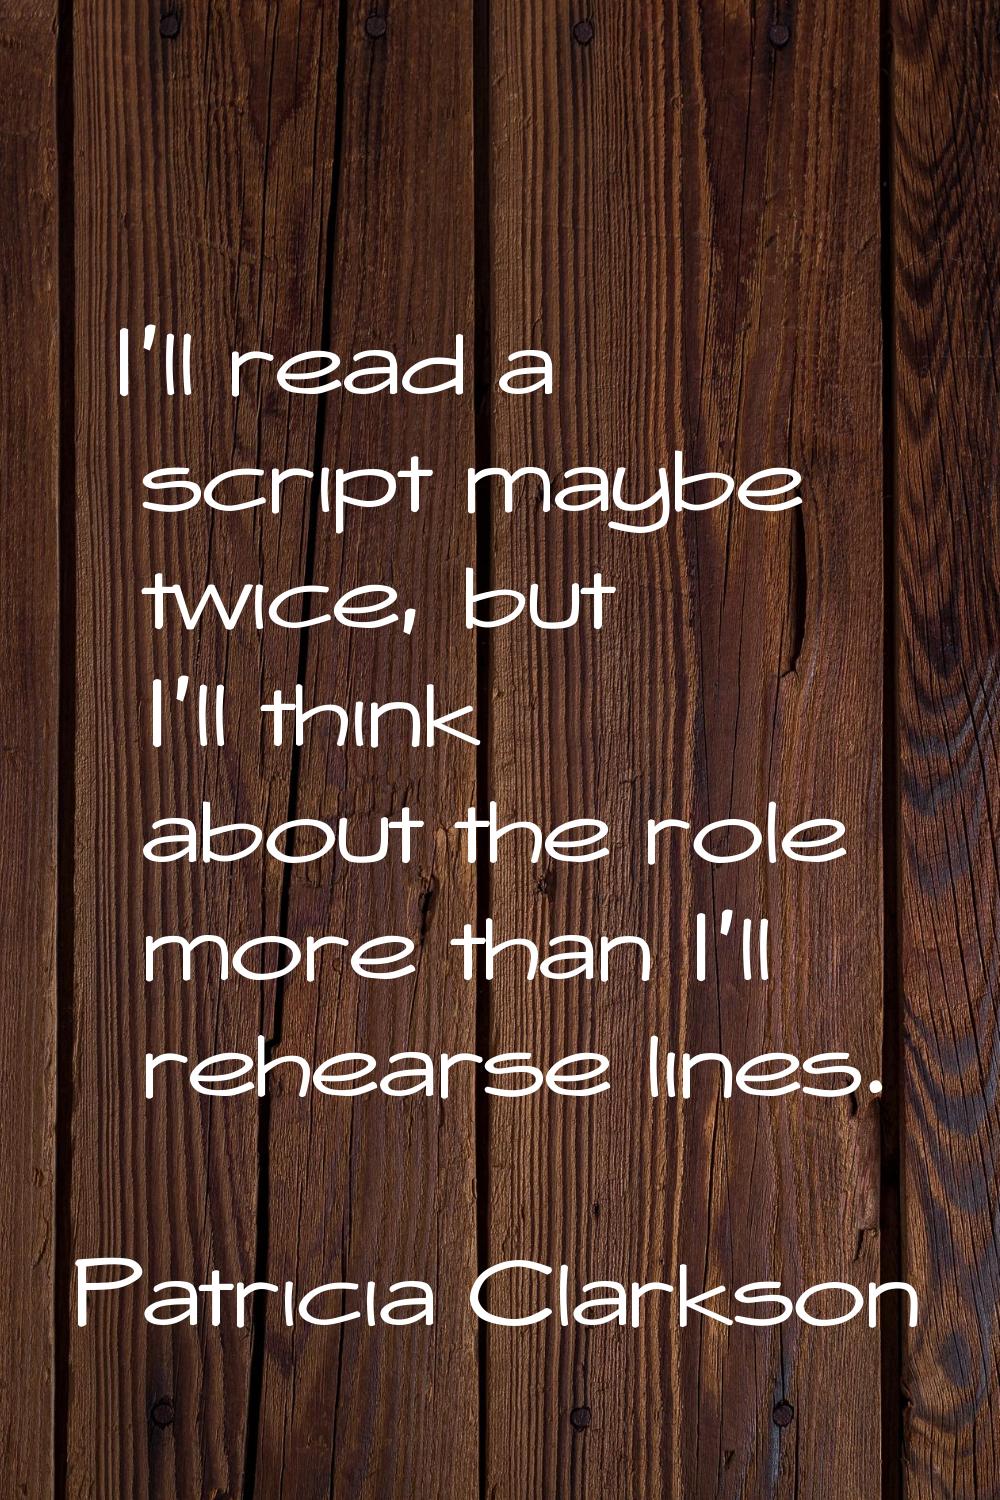 I'll read a script maybe twice, but I'll think about the role more than I'll rehearse lines.